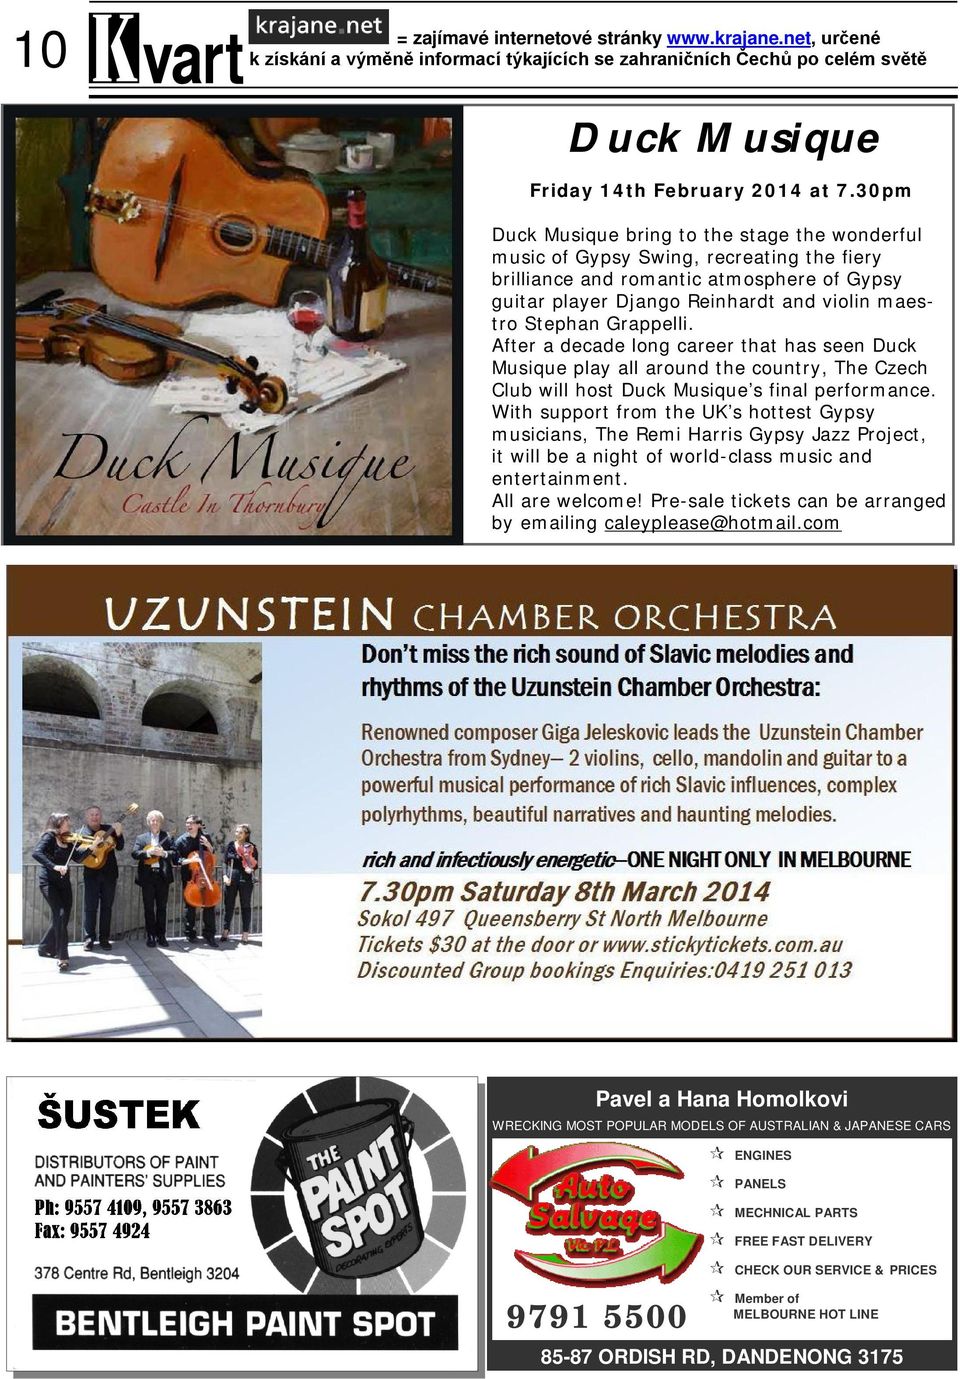 Grappelli. After a decade long career that has seen Duck Musique play all around the country, The Czech Club will host Duck Musique s final performance.